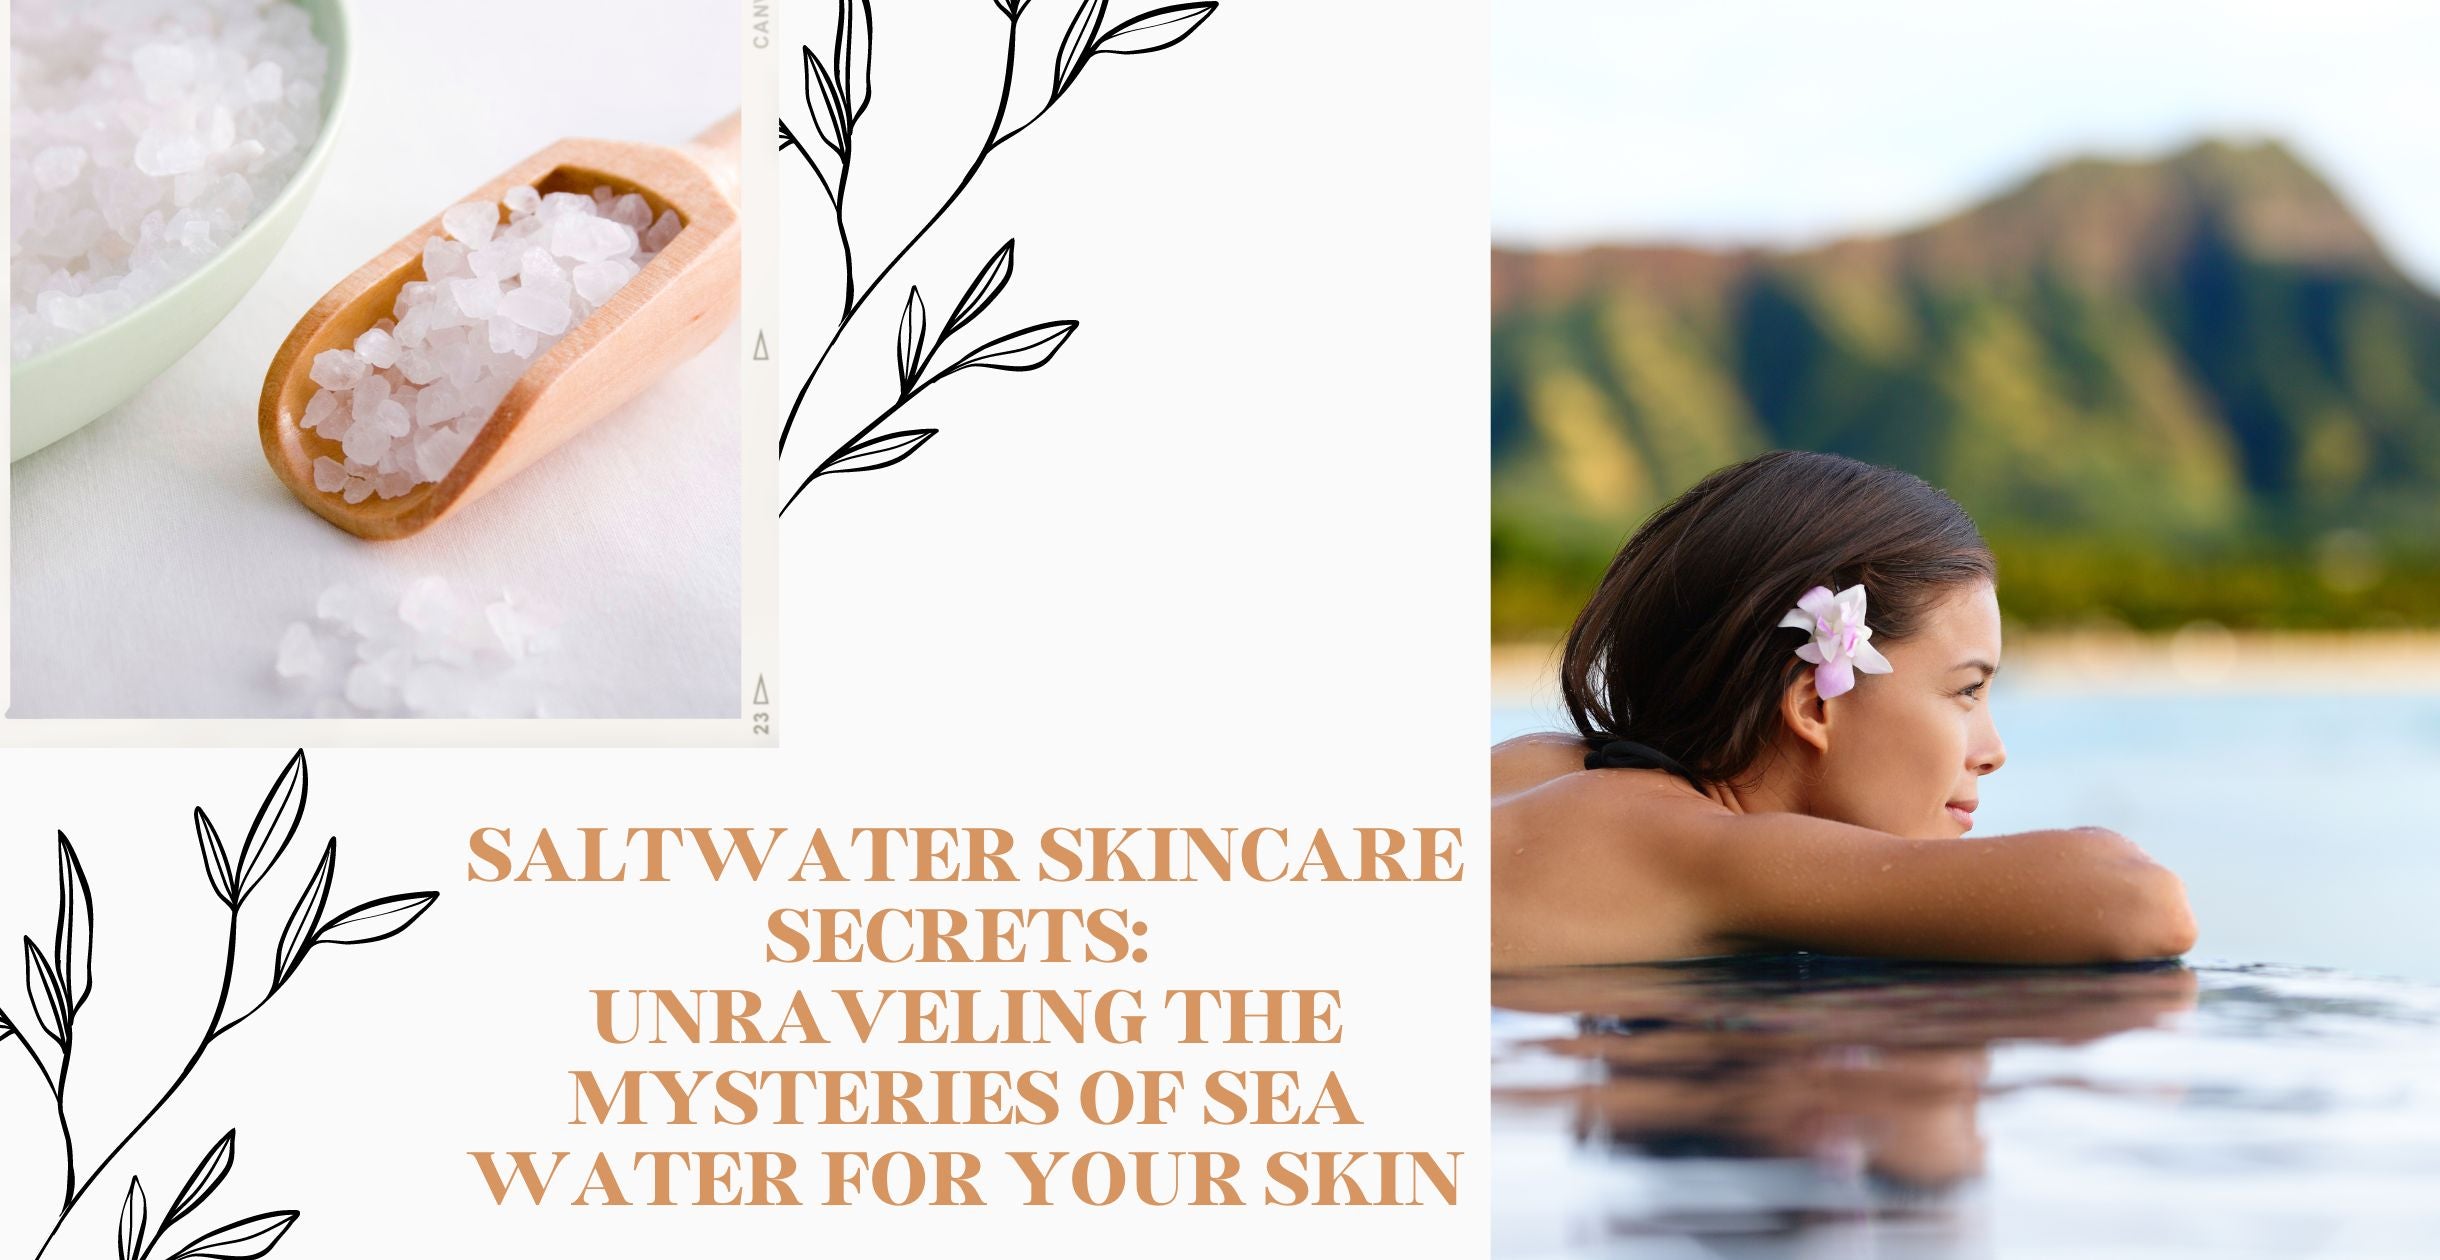 Saltwater Skincare Secrets: Unraveling the Mysteries of Sea Water for Your Skin